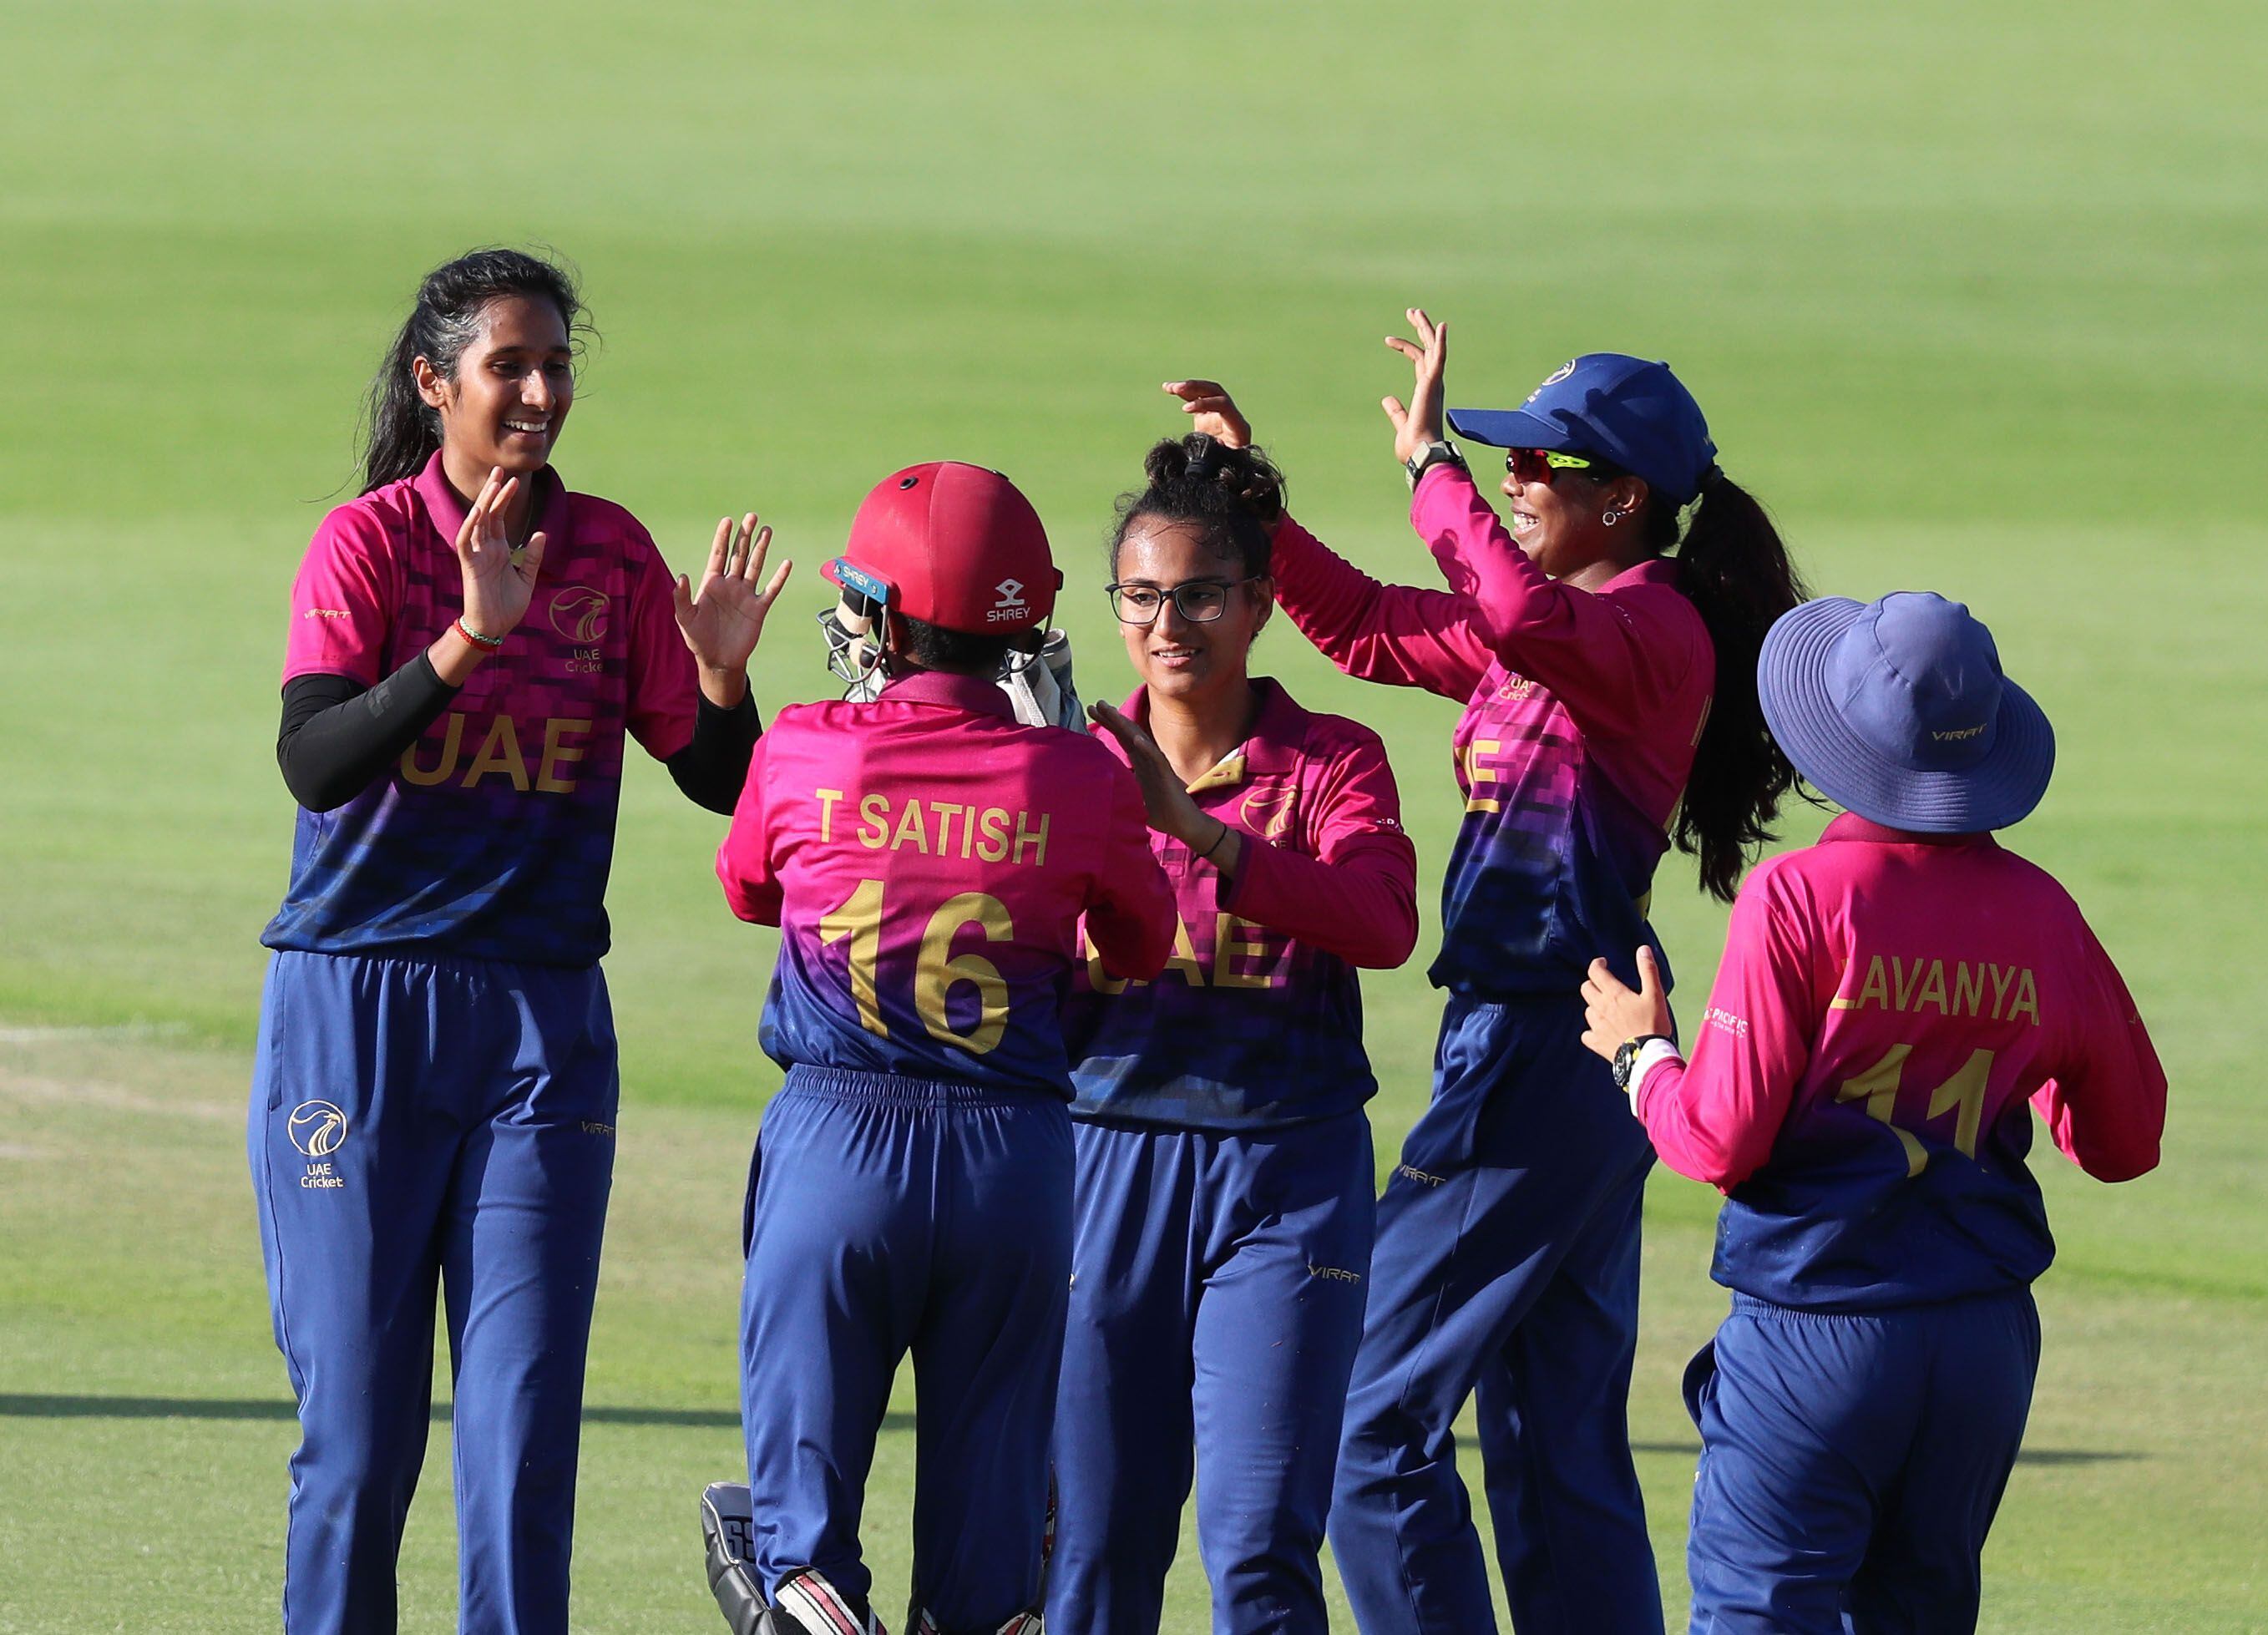 uae face mighty sri lanka for place at women’s t20 world cup in bangladesh